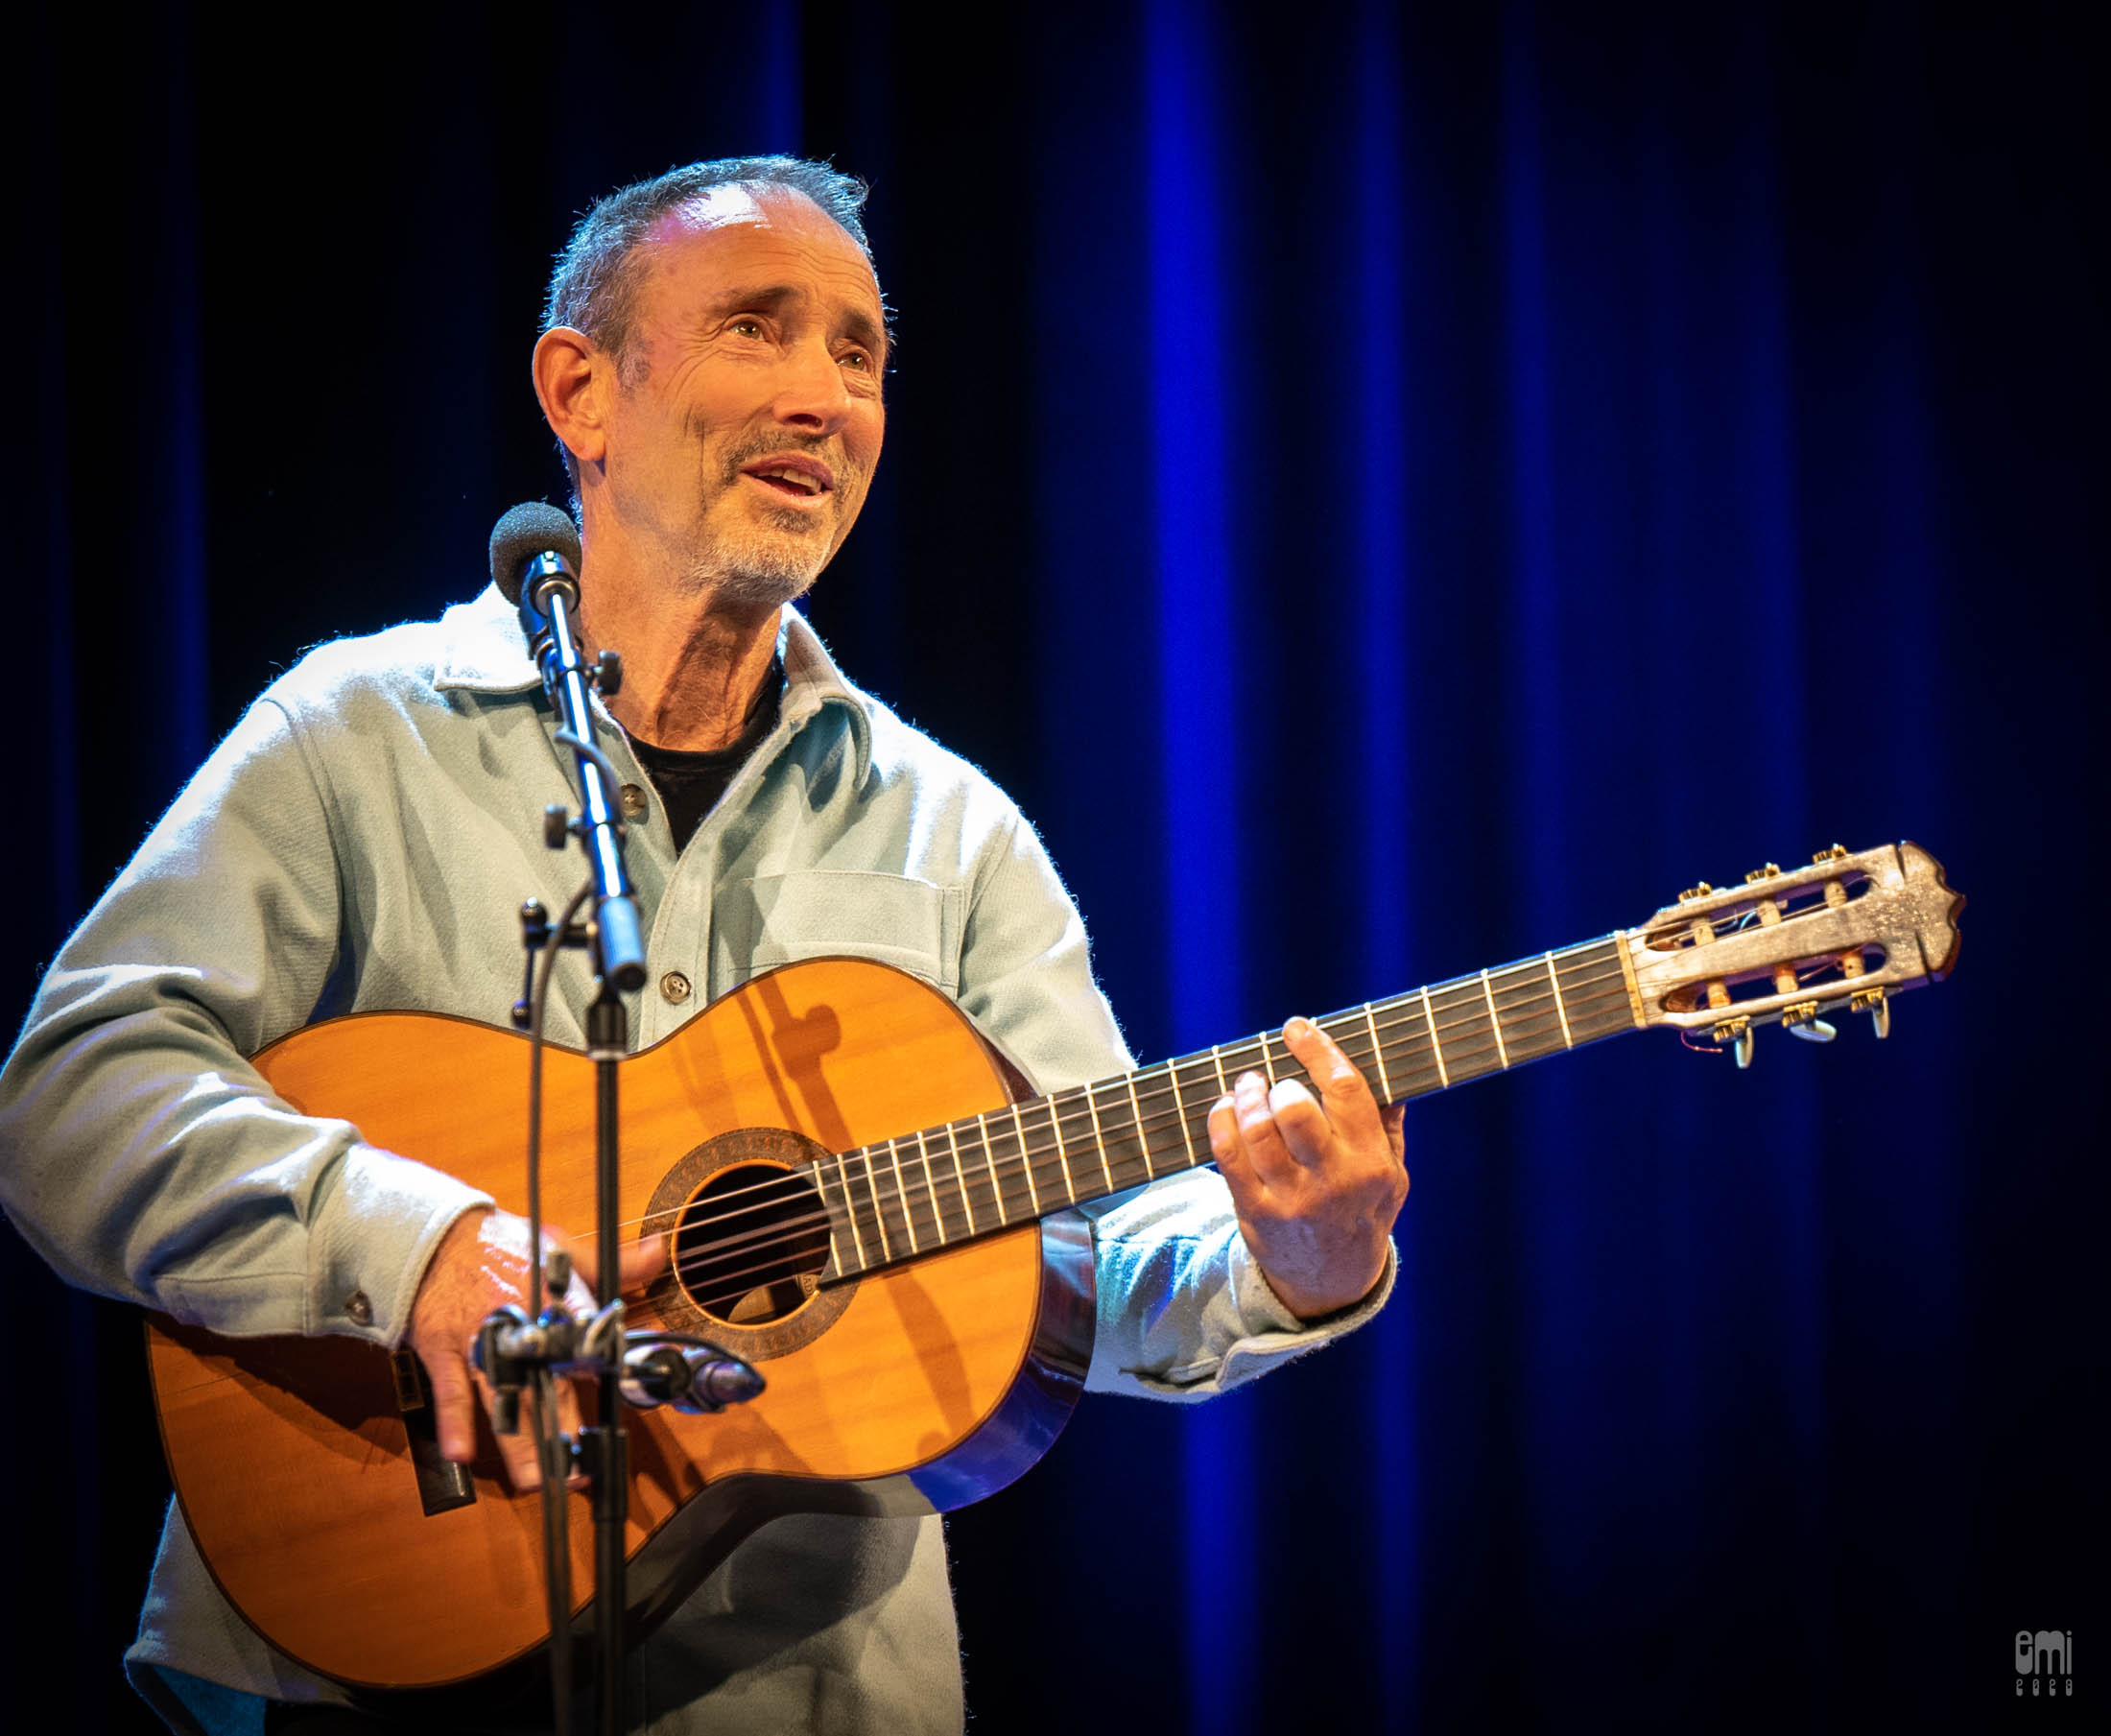 2023.2.17 Jonathan Richman featuring Tommy Larkins on drums Herbst Theatre, San Francisco. photo by emi